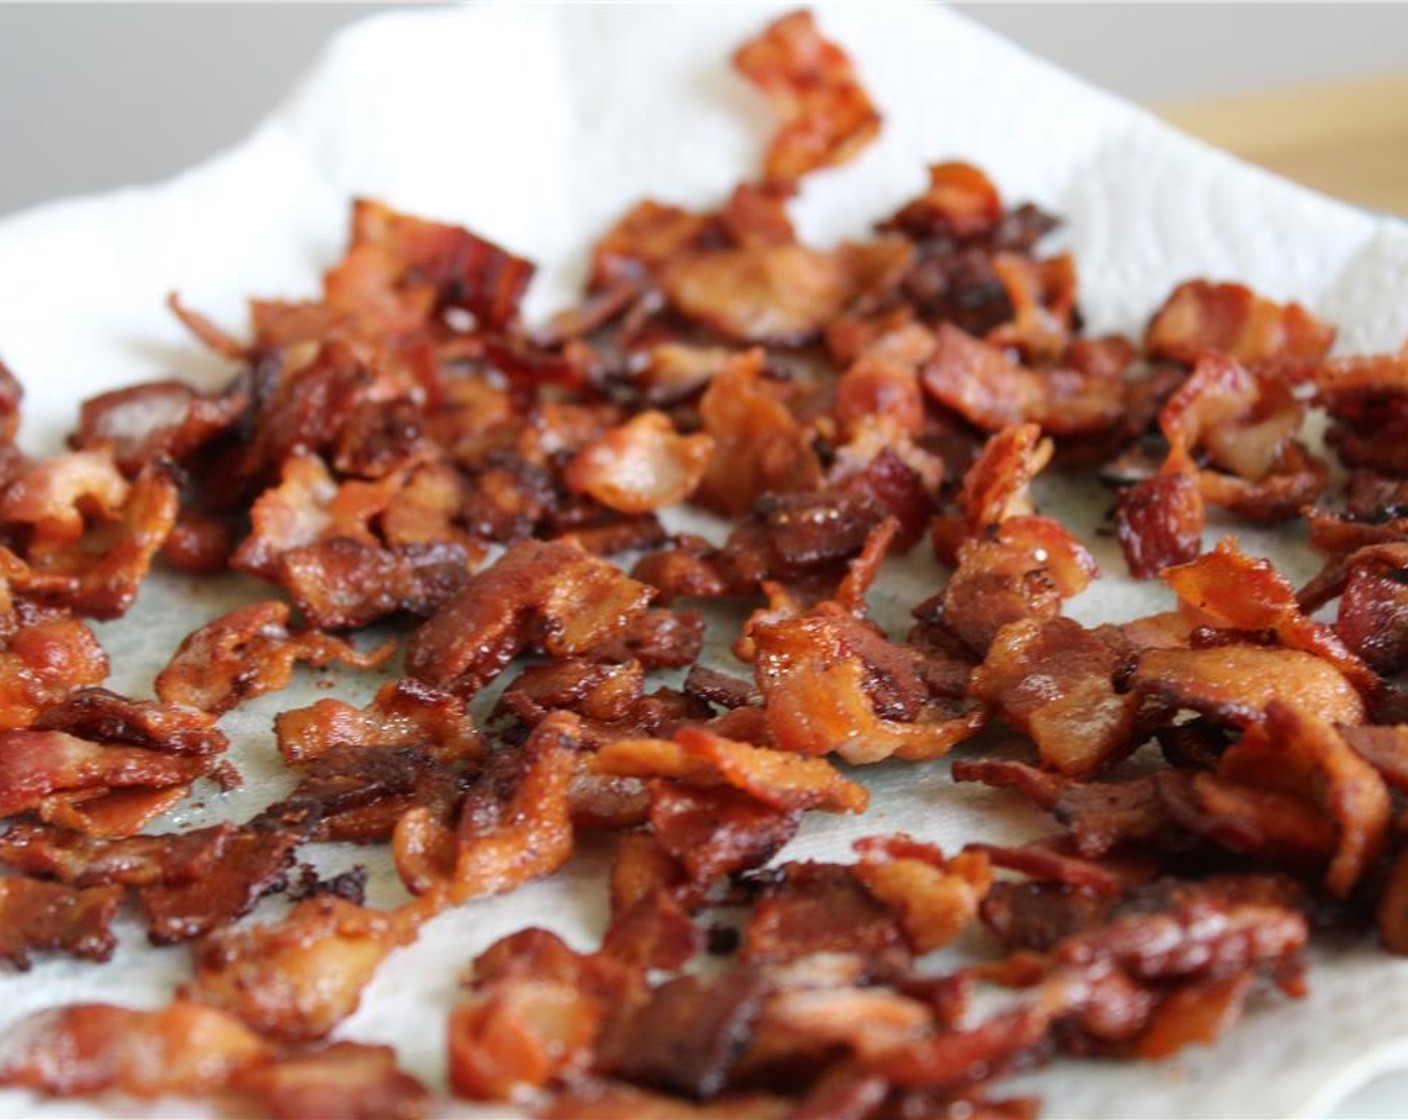 step 7 In a large skillet over medium heat, fry the chopped bacon until crispy. Drain on a paper towel-lined plate and reserve the rendered bacon grease.